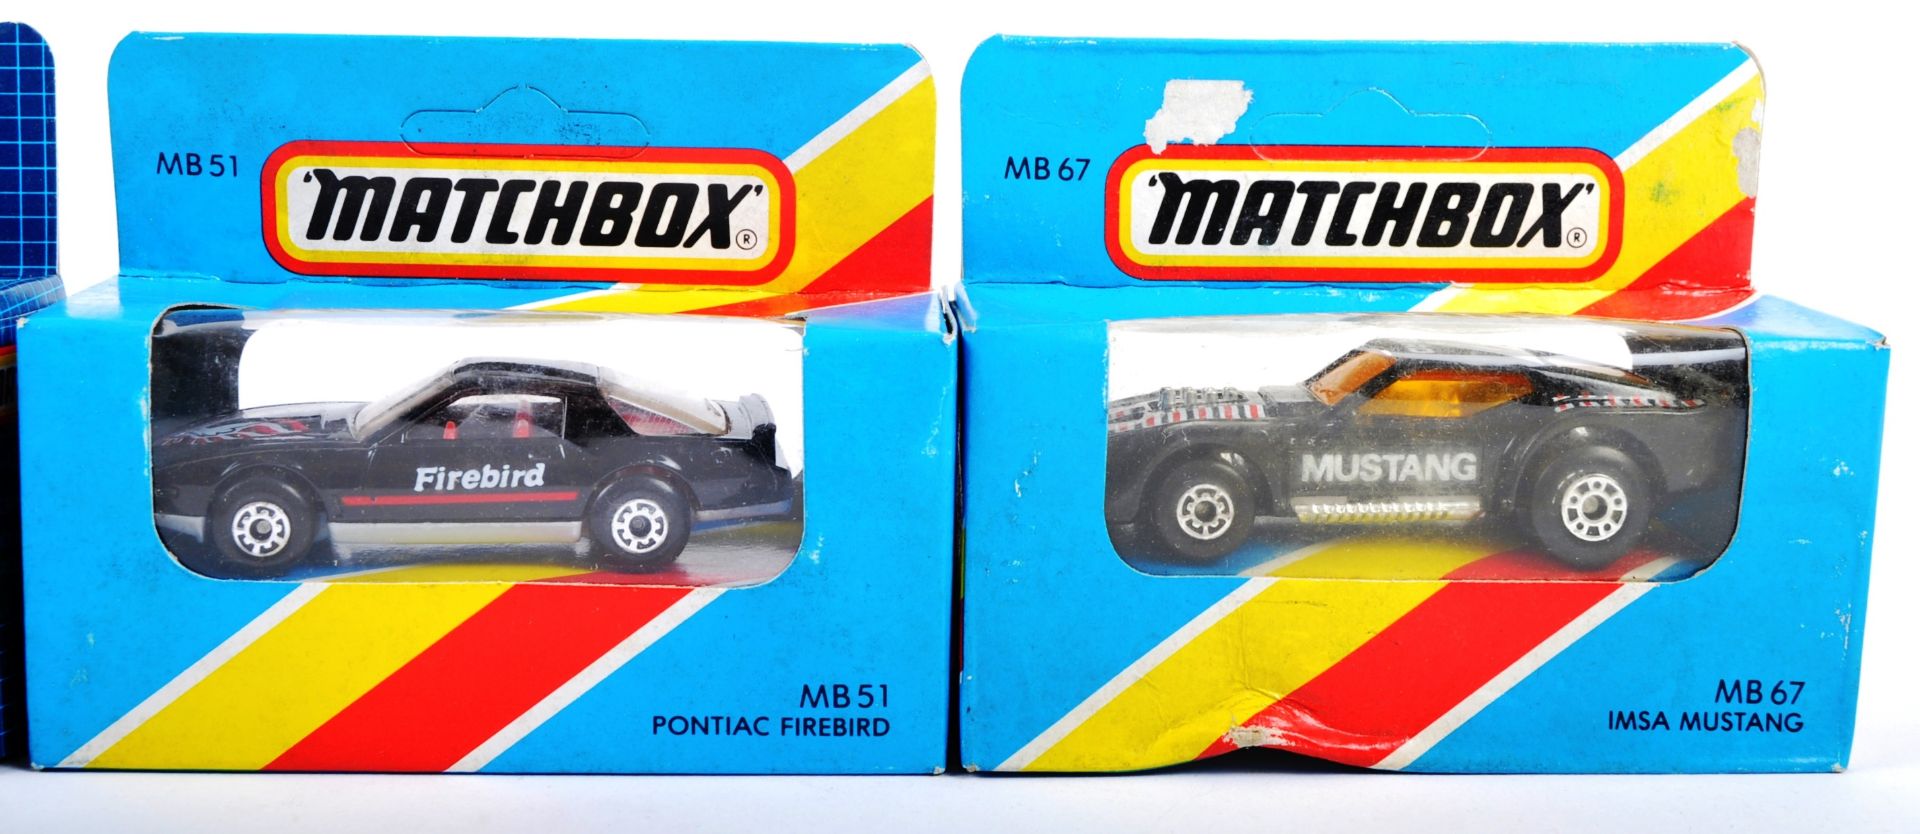 MATCHBOX 1-75 SERIES MIXED TRADE BOX DIECAST MODEL CARS - Image 4 of 5